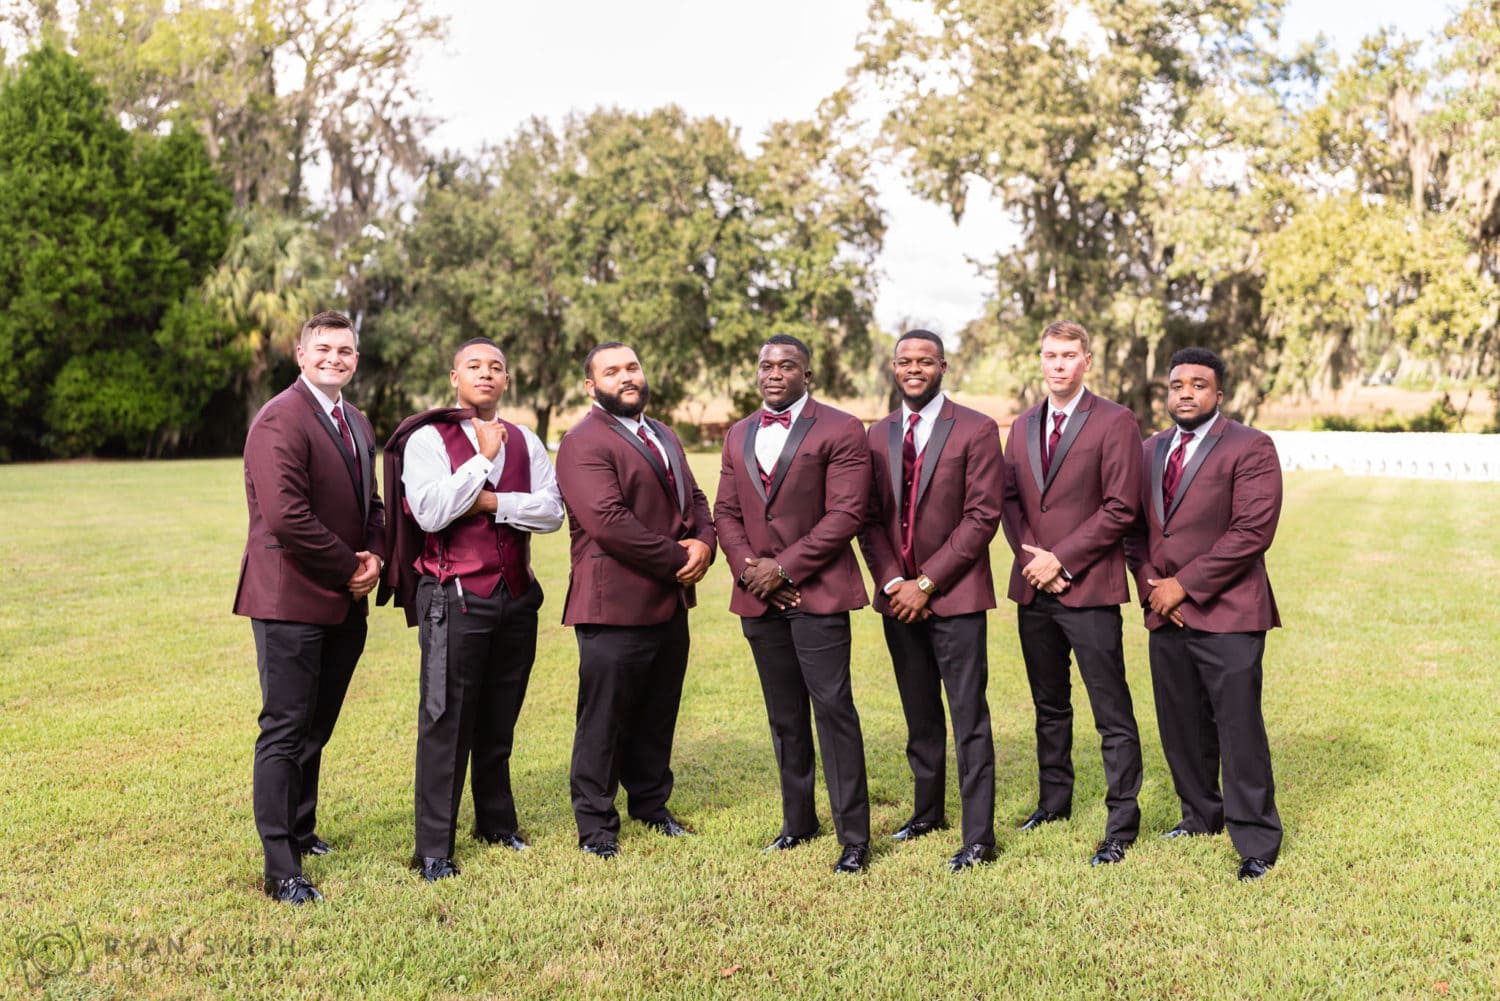 Pictures with the groomsmen before ceremony - Magnolia Plantation - Charleston, SC